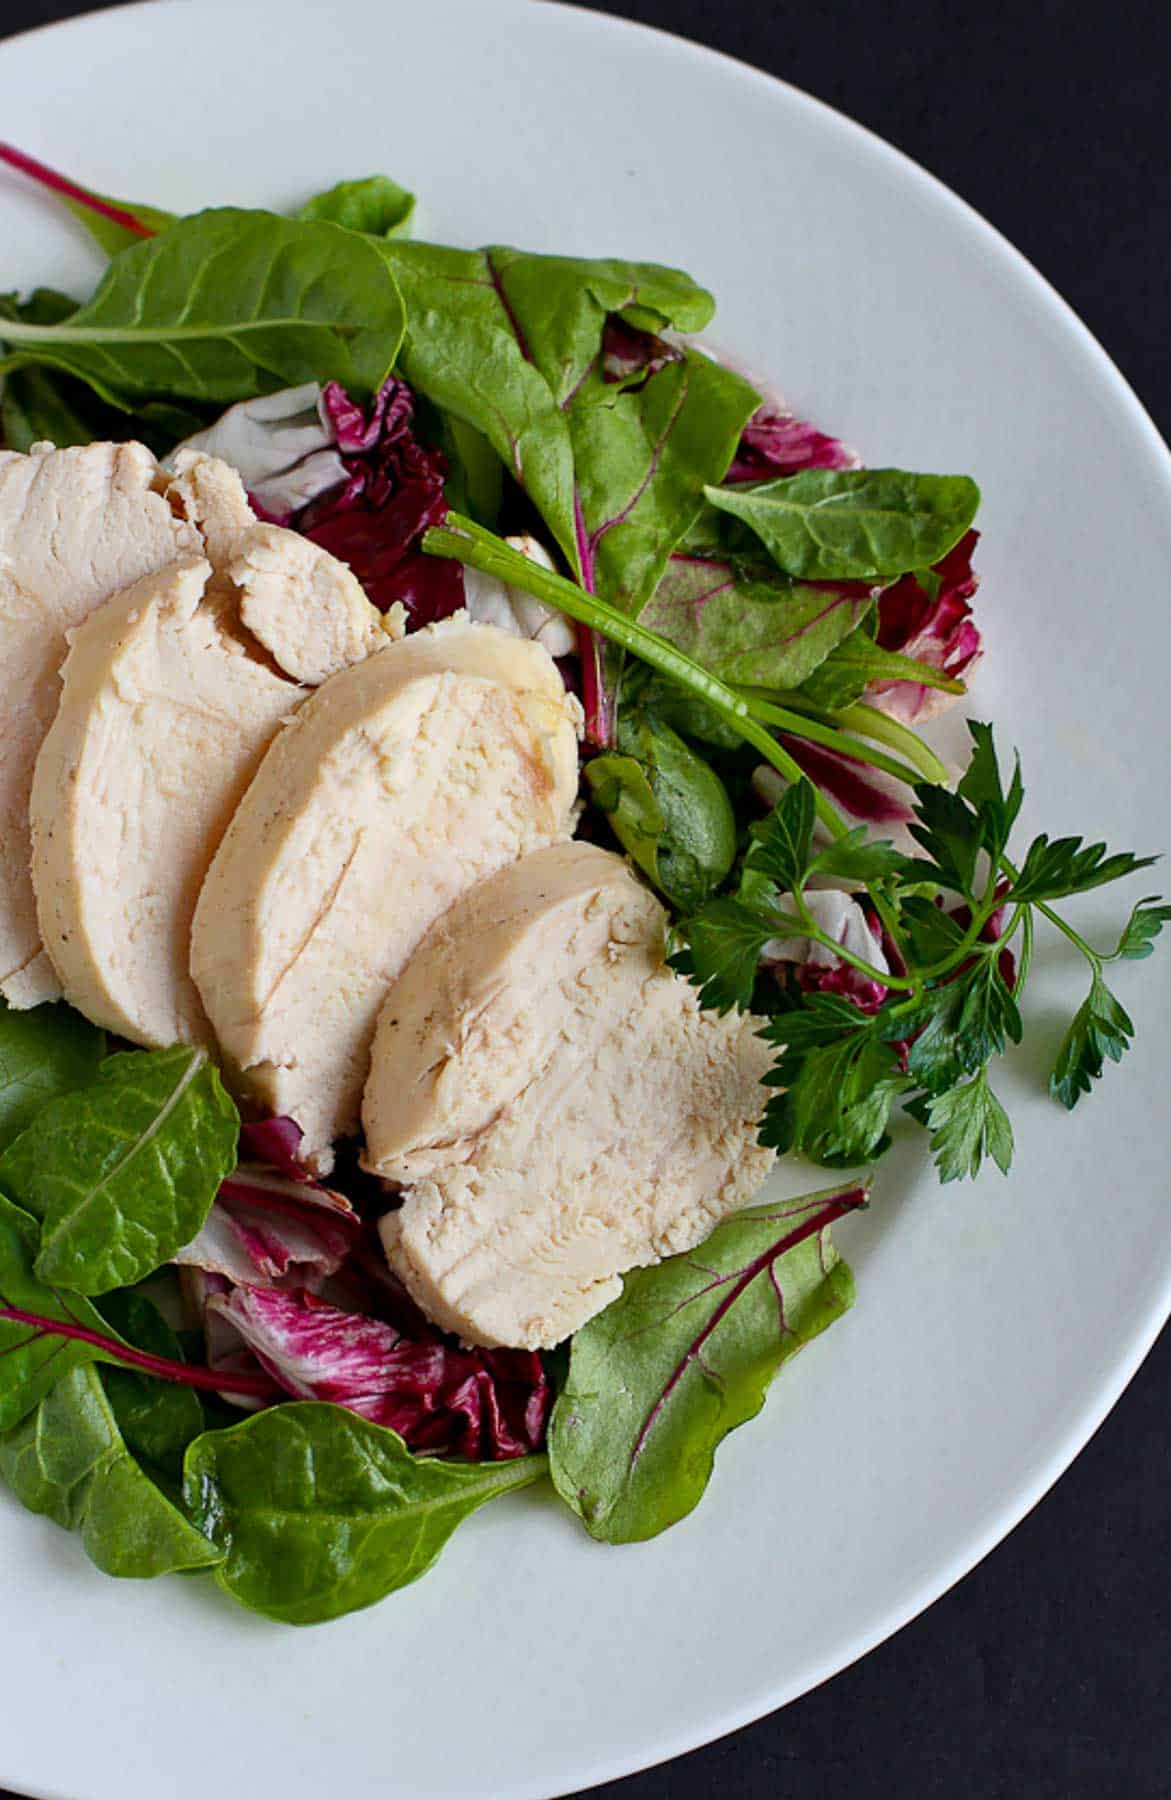 Salad with sliced chicken on a white plate.